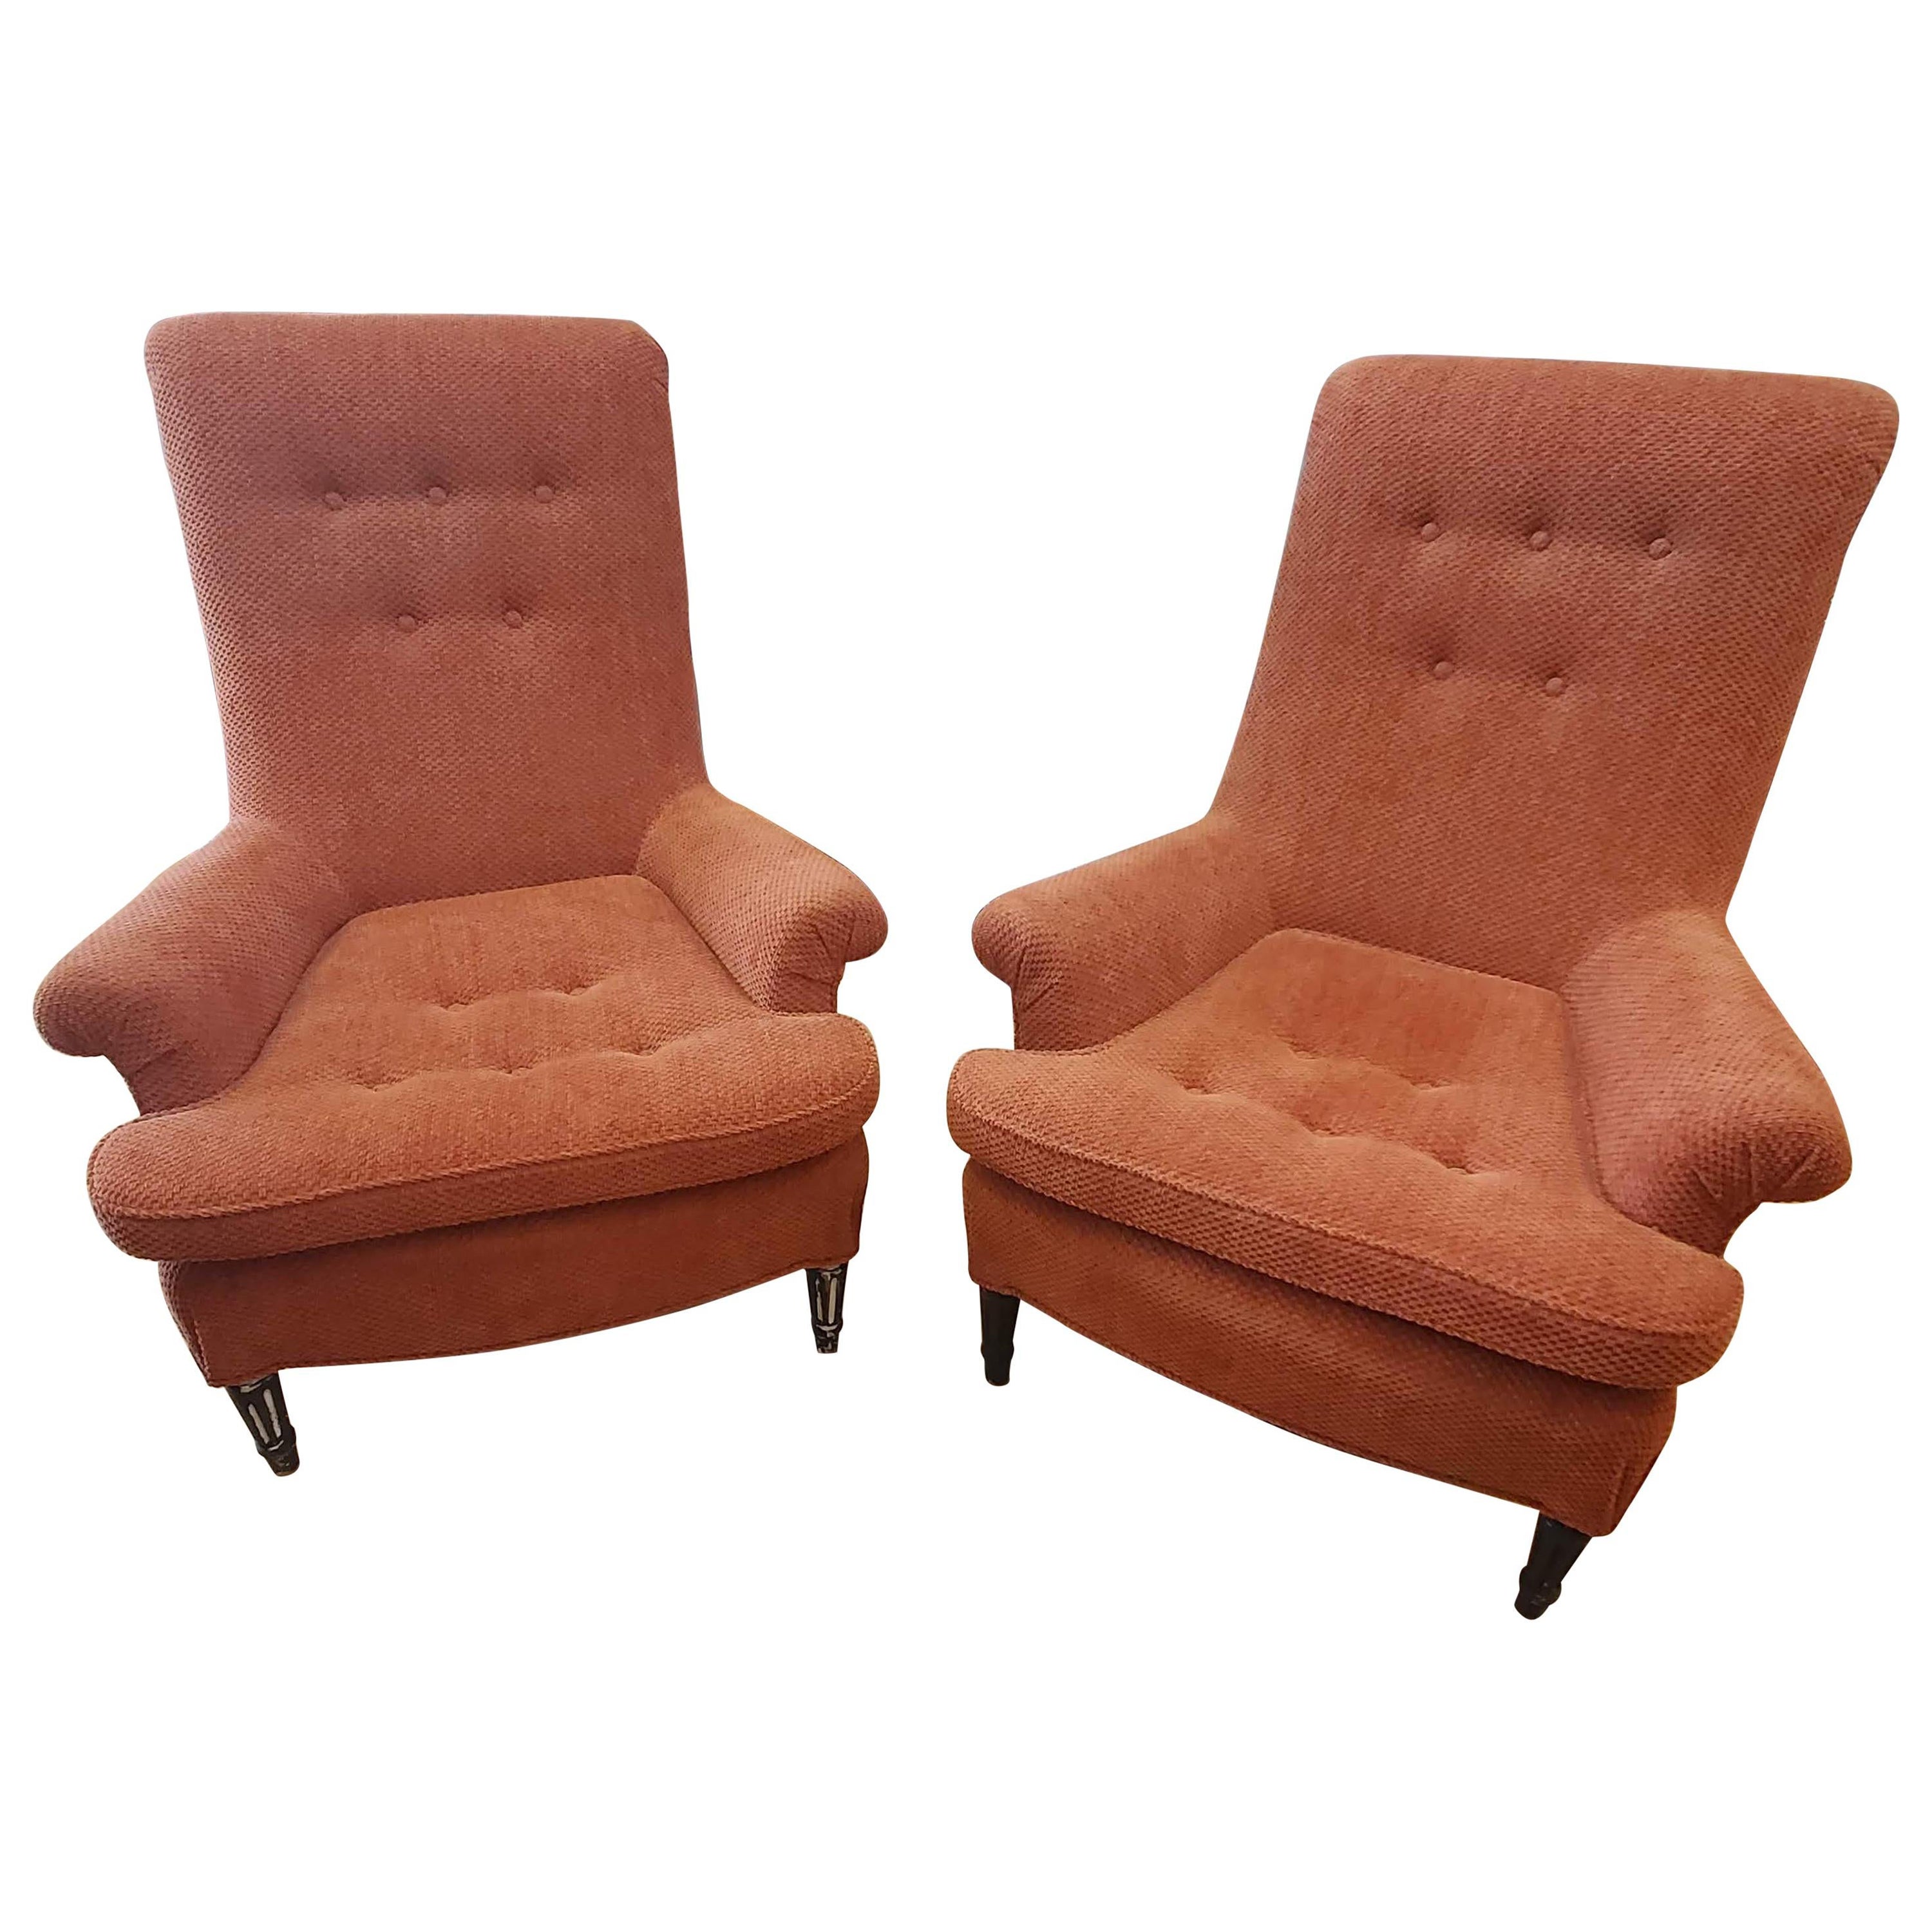 Pair of 19th Century English Club Chairs with Orange Chenille Upholstery